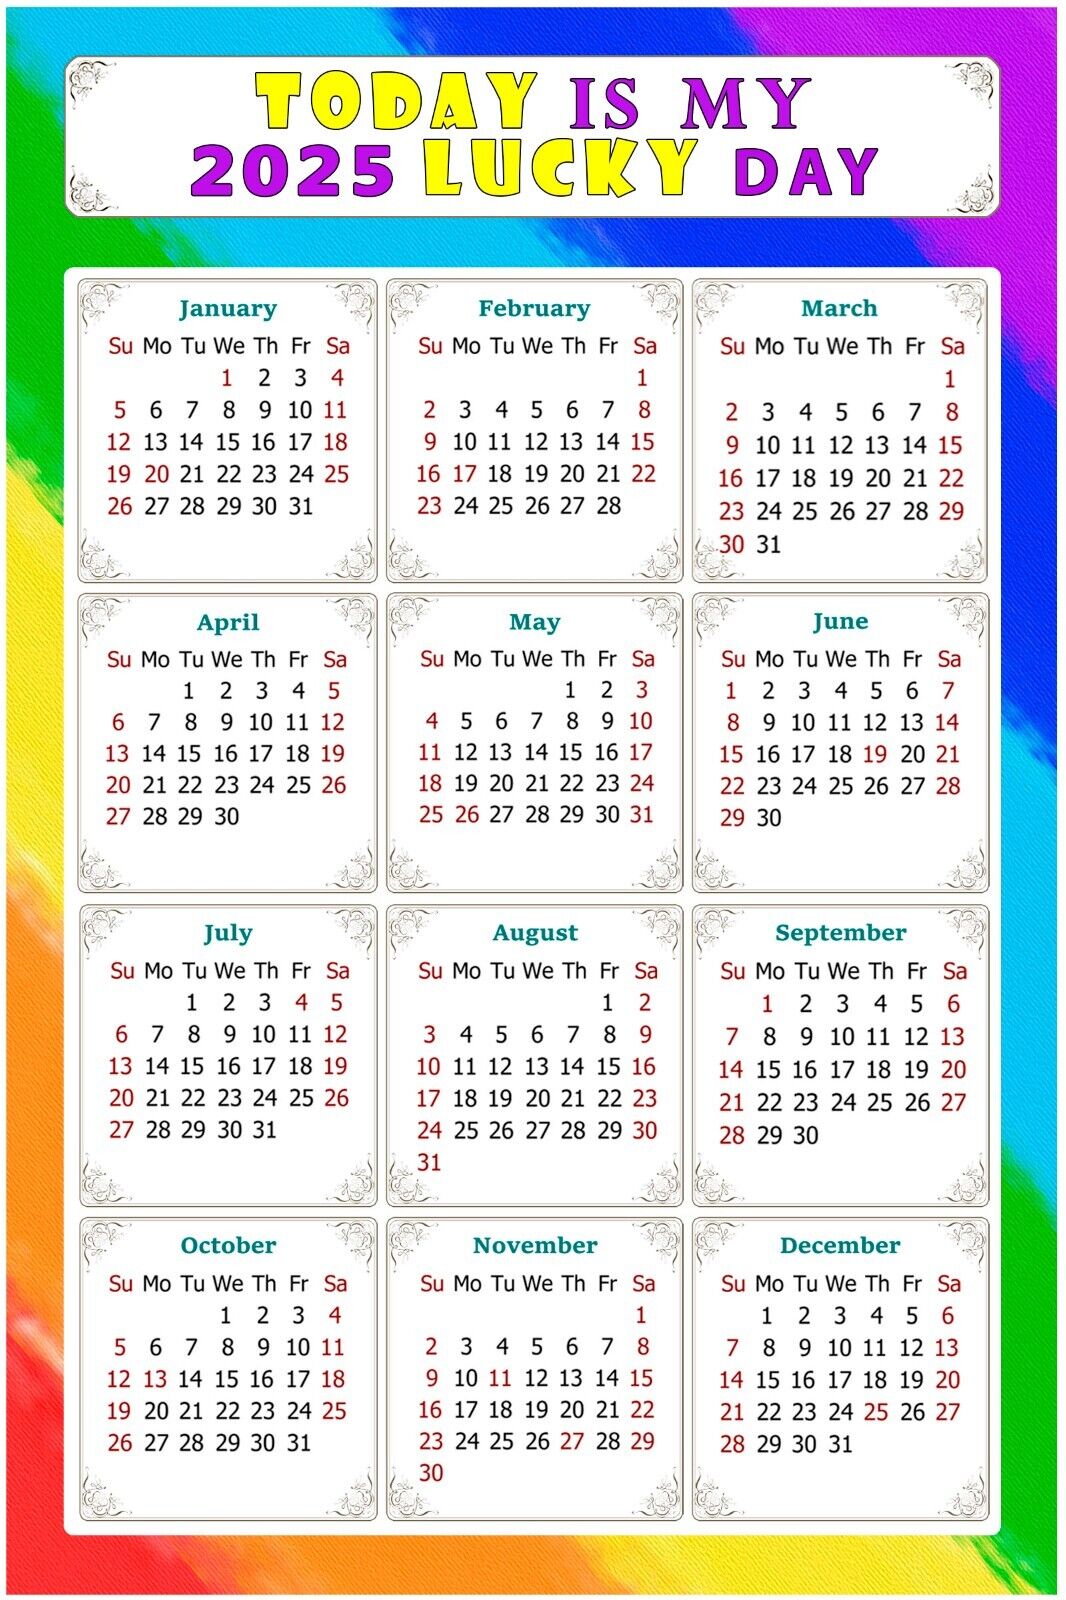 2025 Magnetic Calendar - Today is my Lucky Day - v043 5.25 x 8